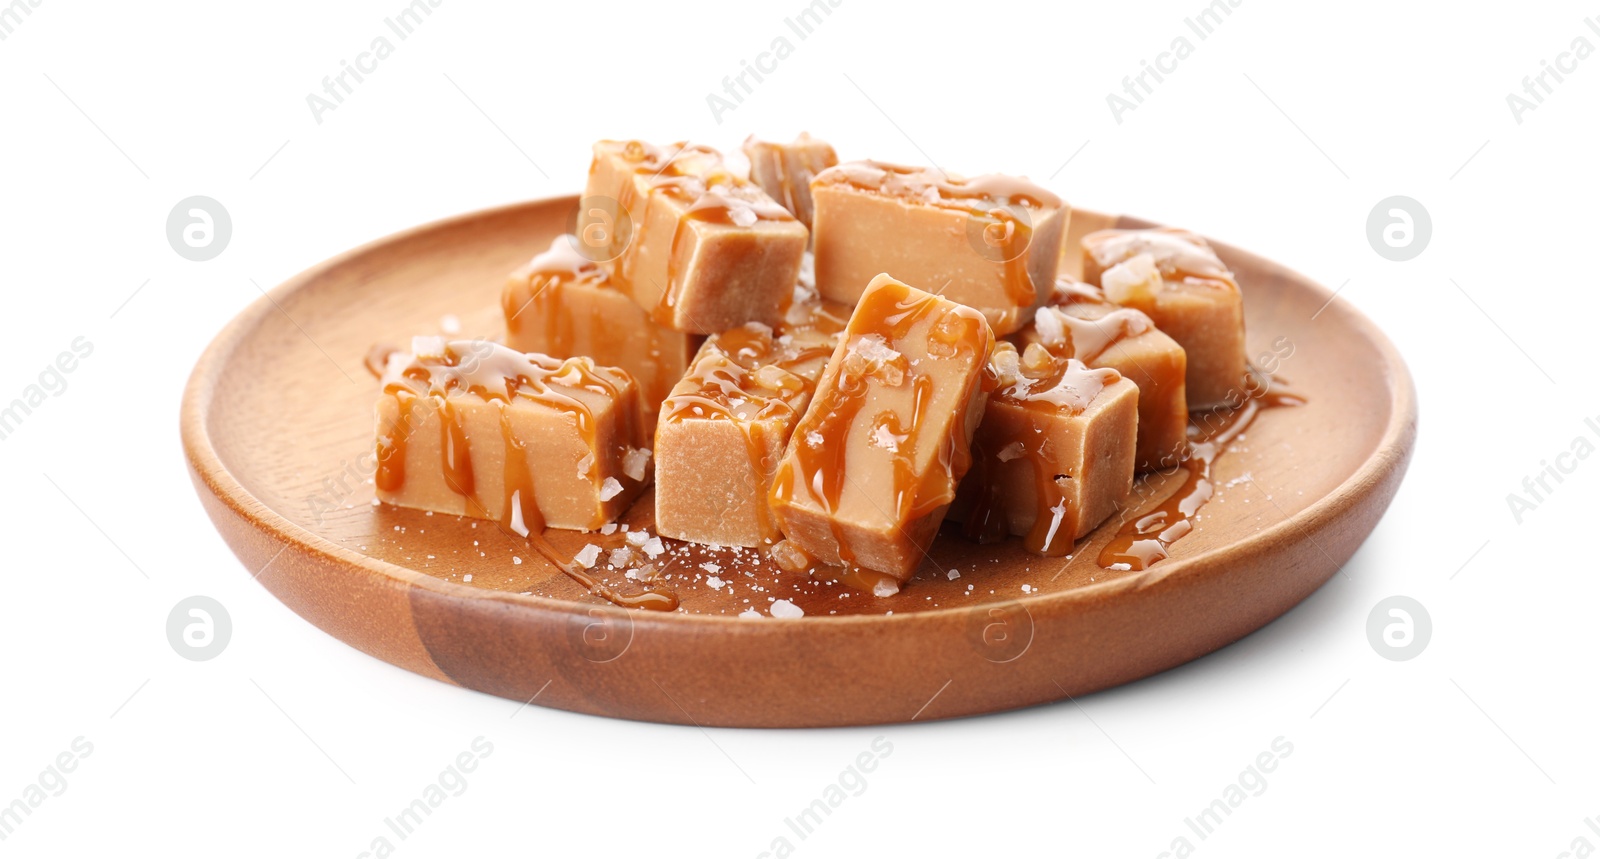 Photo of Plate with tasty candies, caramel sauce and salt isolated on white